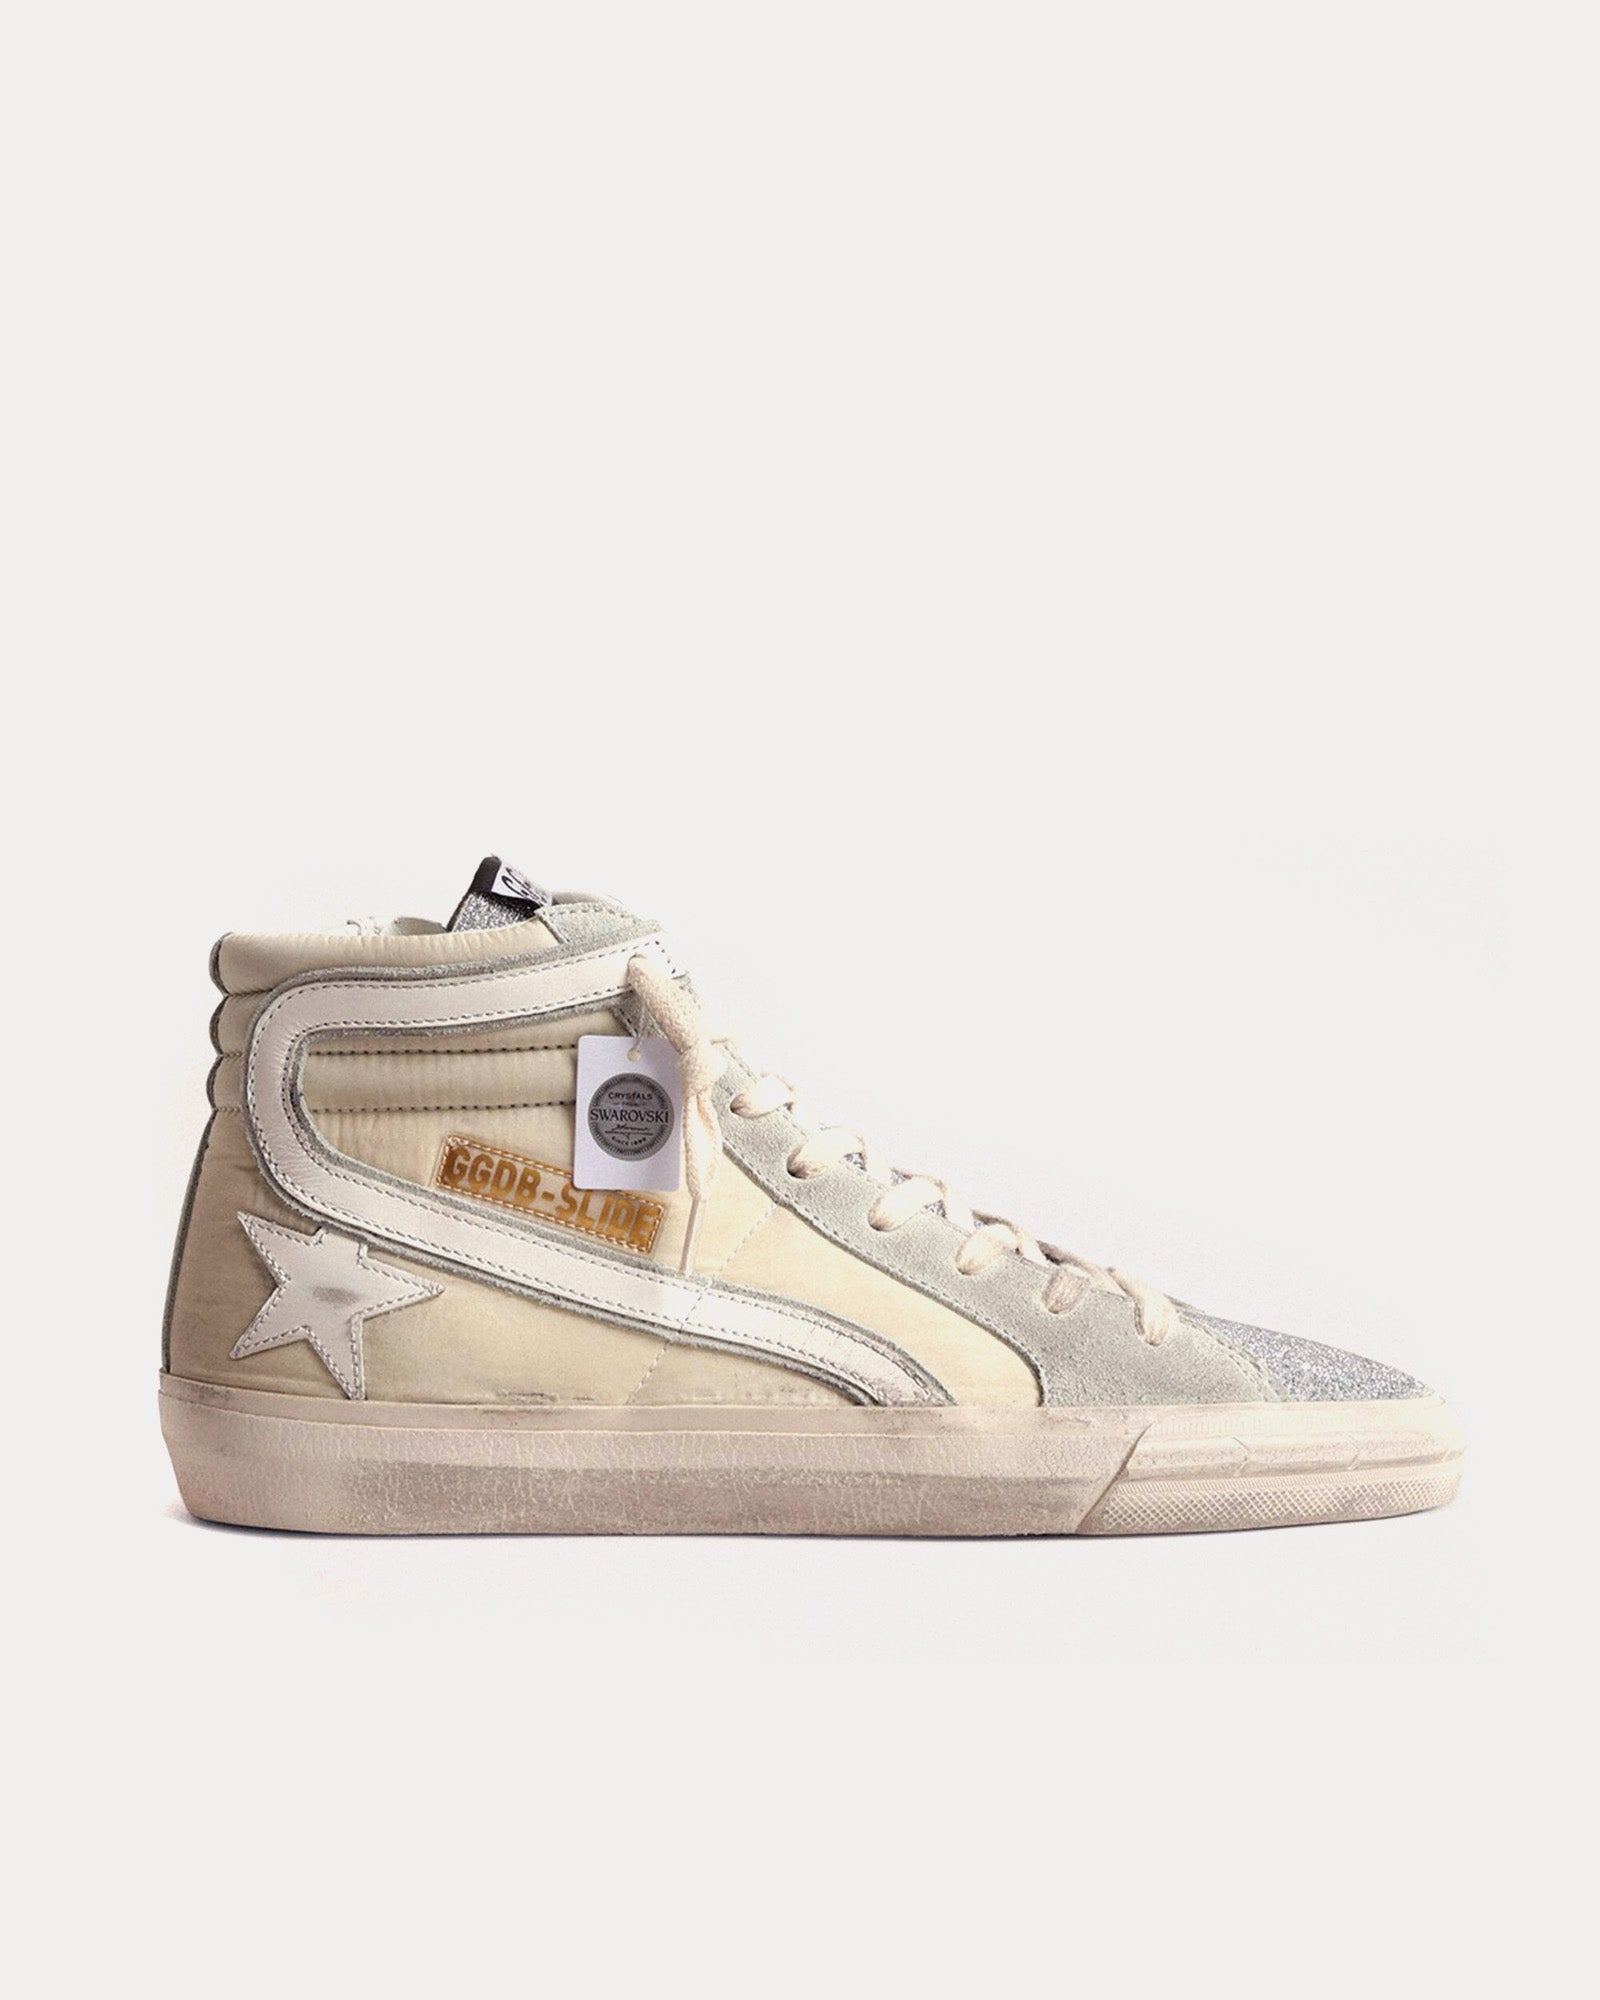 Golden Goose - Slide Nylon & Leather Star with Flash Ivory / White High Top Sneakers